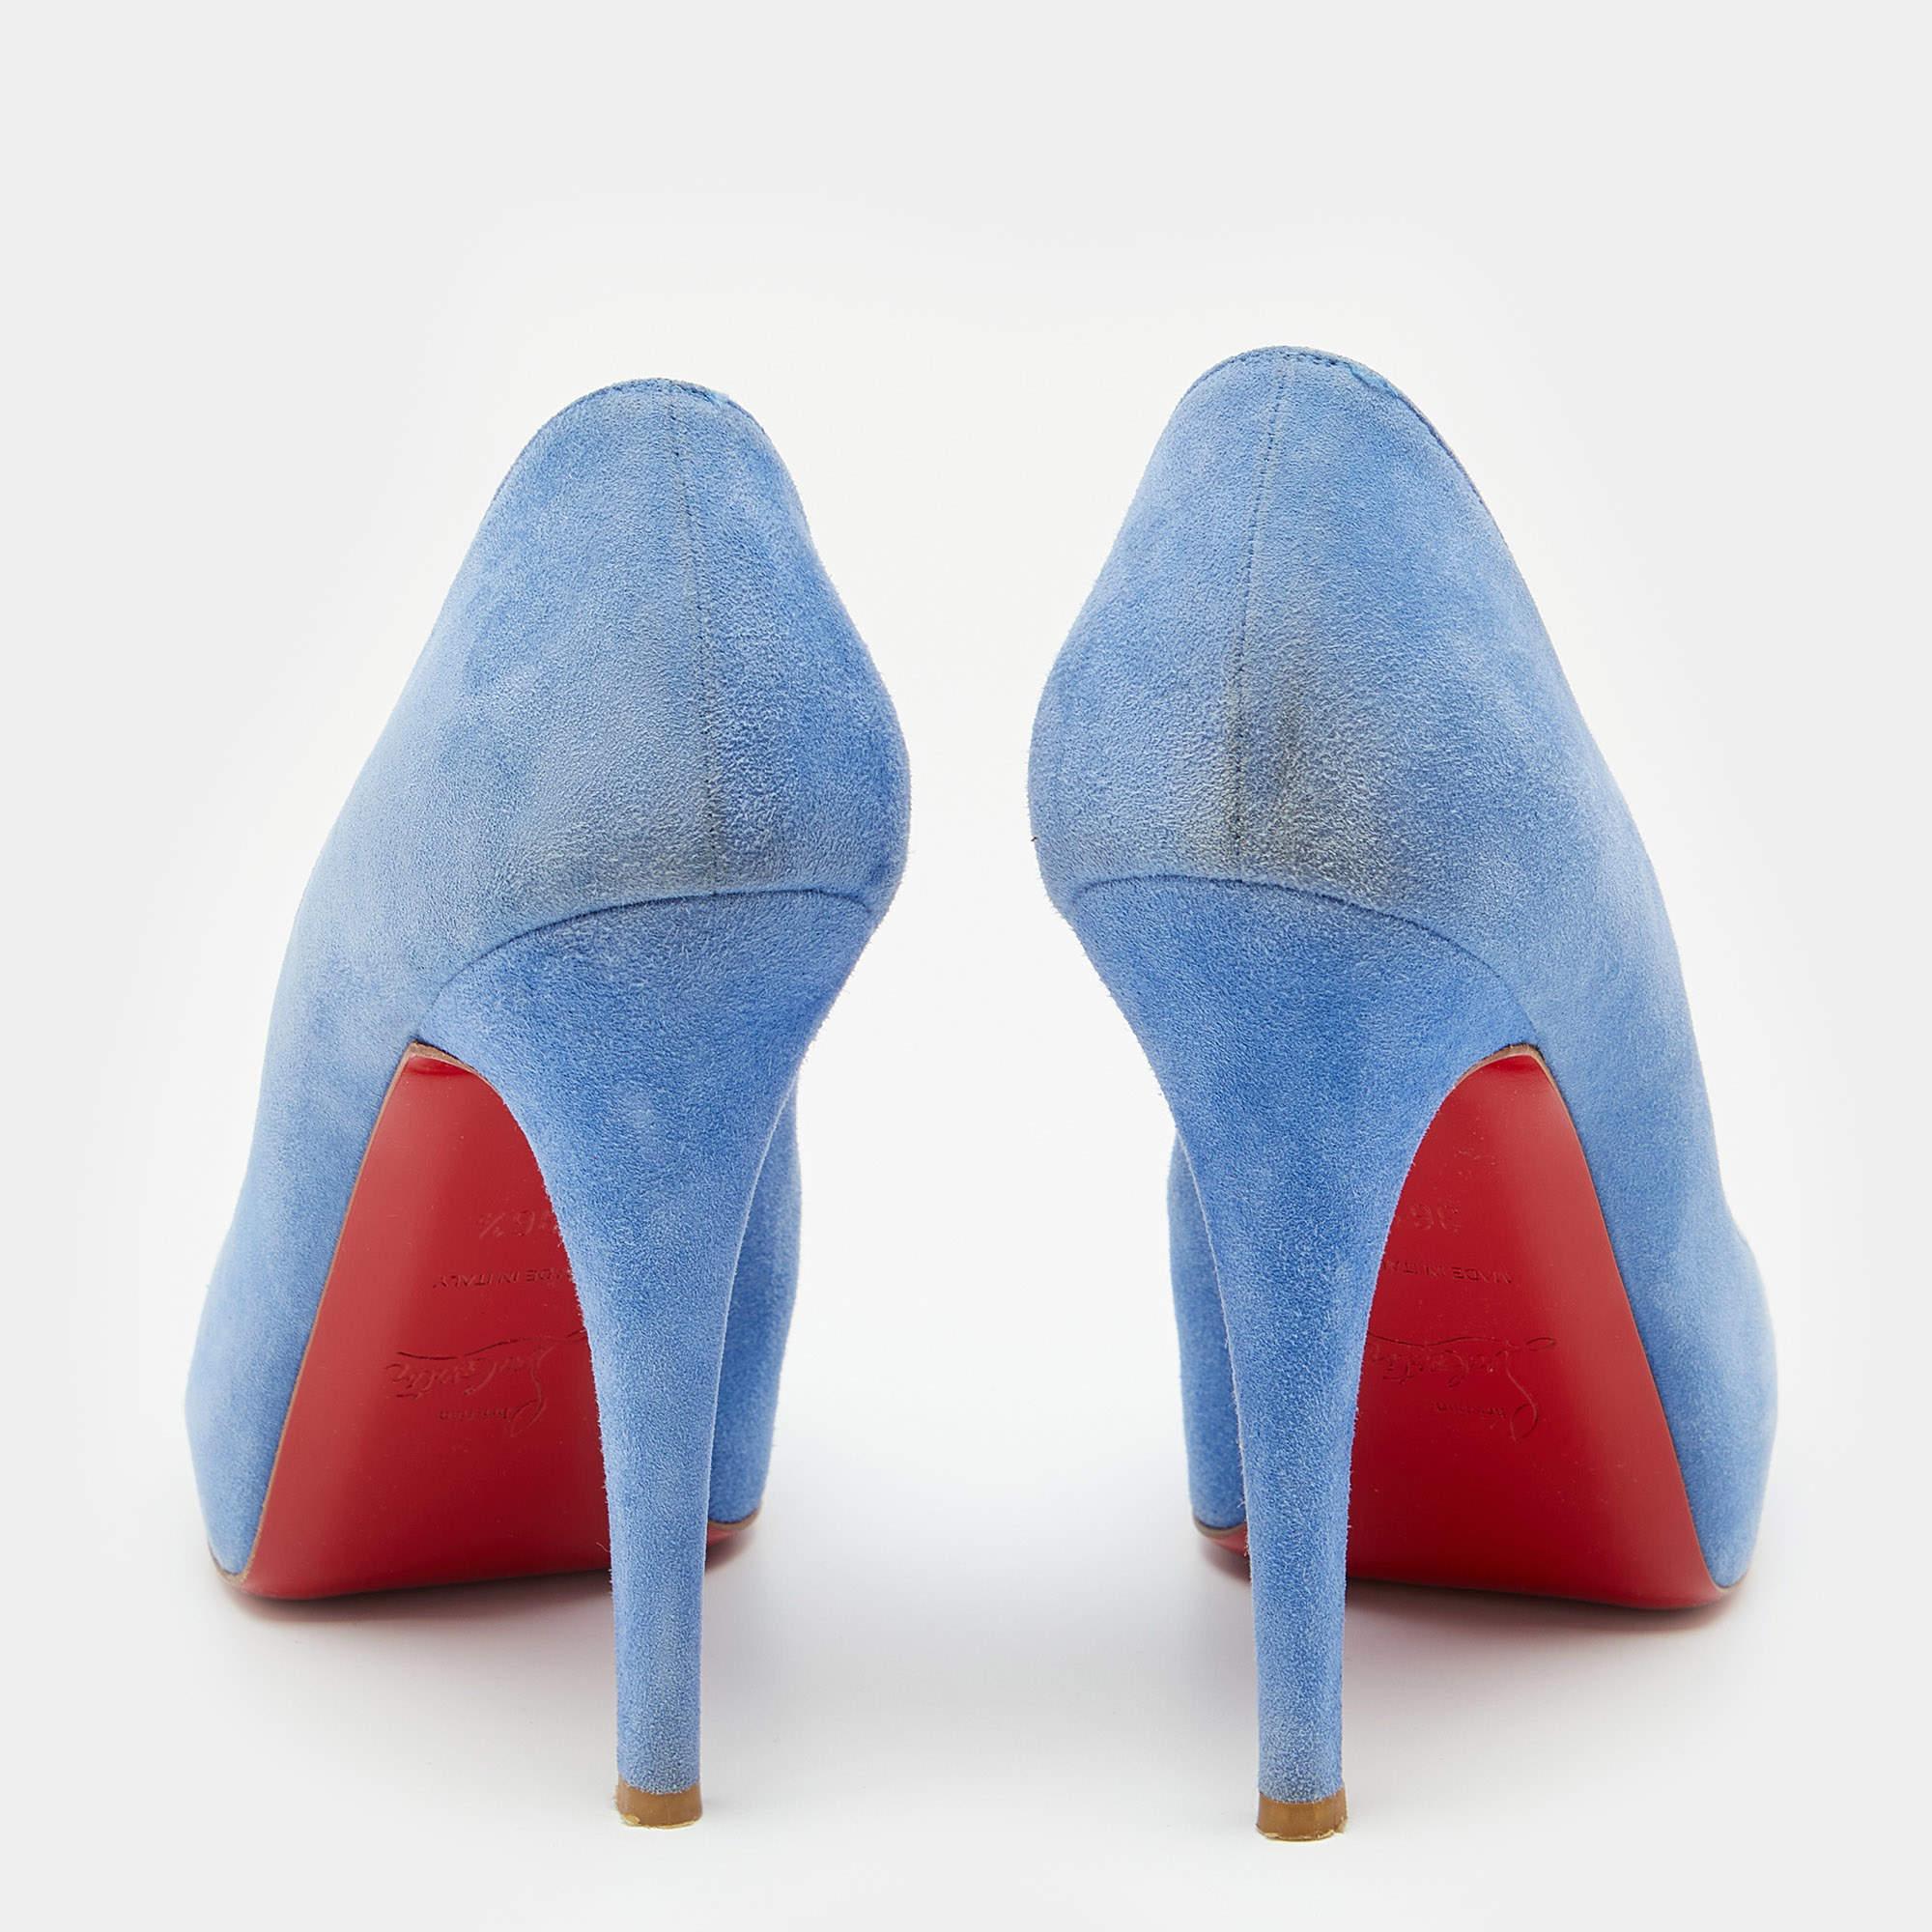 Christian Louboutin Blue Suede New Very Prive Peep Toe Pumps Size 36.5 In Good Condition For Sale In Dubai, Al Qouz 2